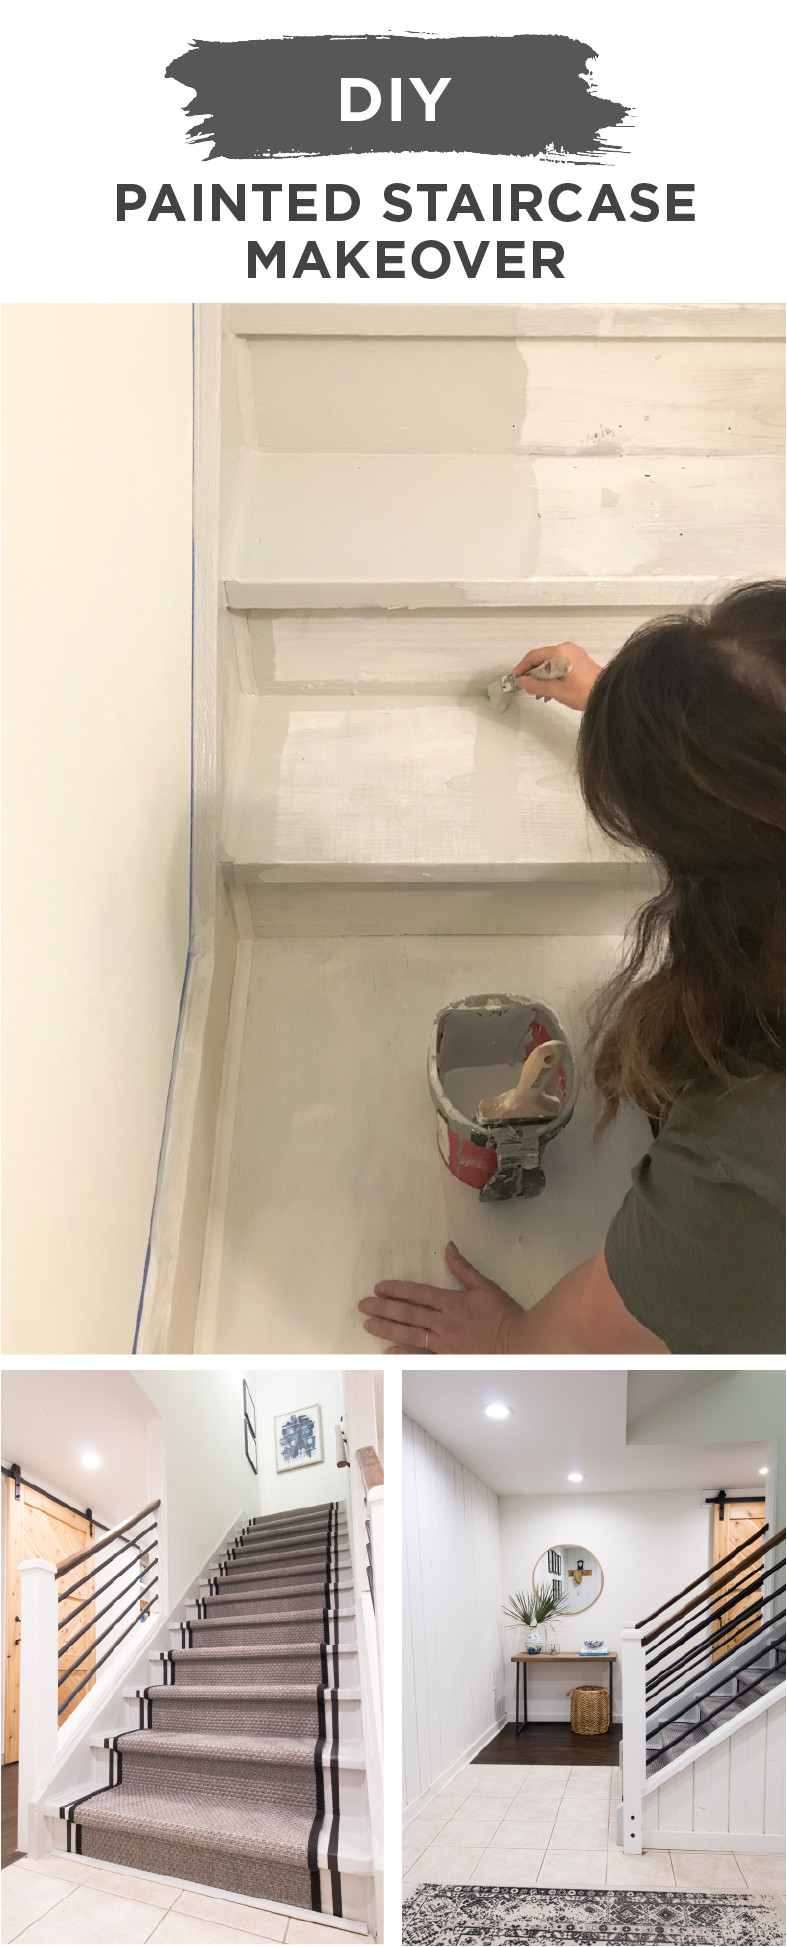 this diy painted stairs and striped staircase makeover from leslie of deeply southern home using kilz 2 latexa primer and kilz complete coata paint